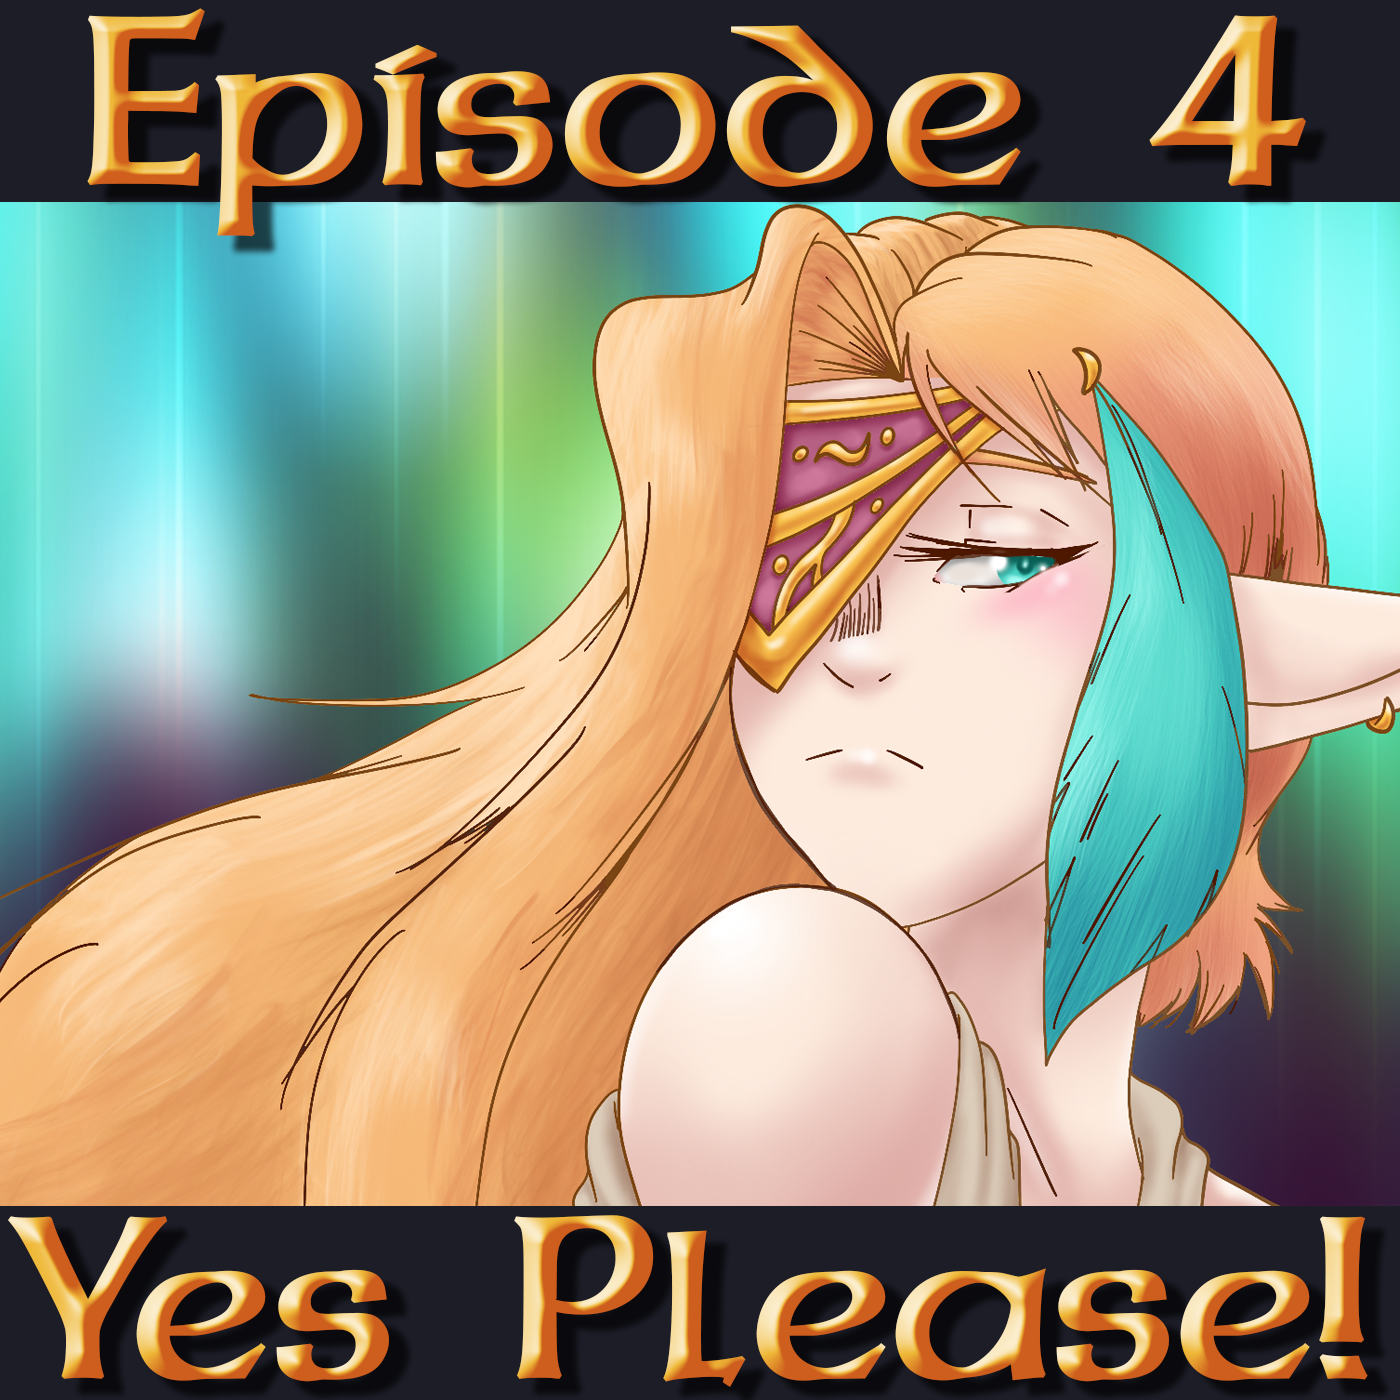 Yes Please! Episode 4: Changes and Mother (Check Please! S1 E26.6)